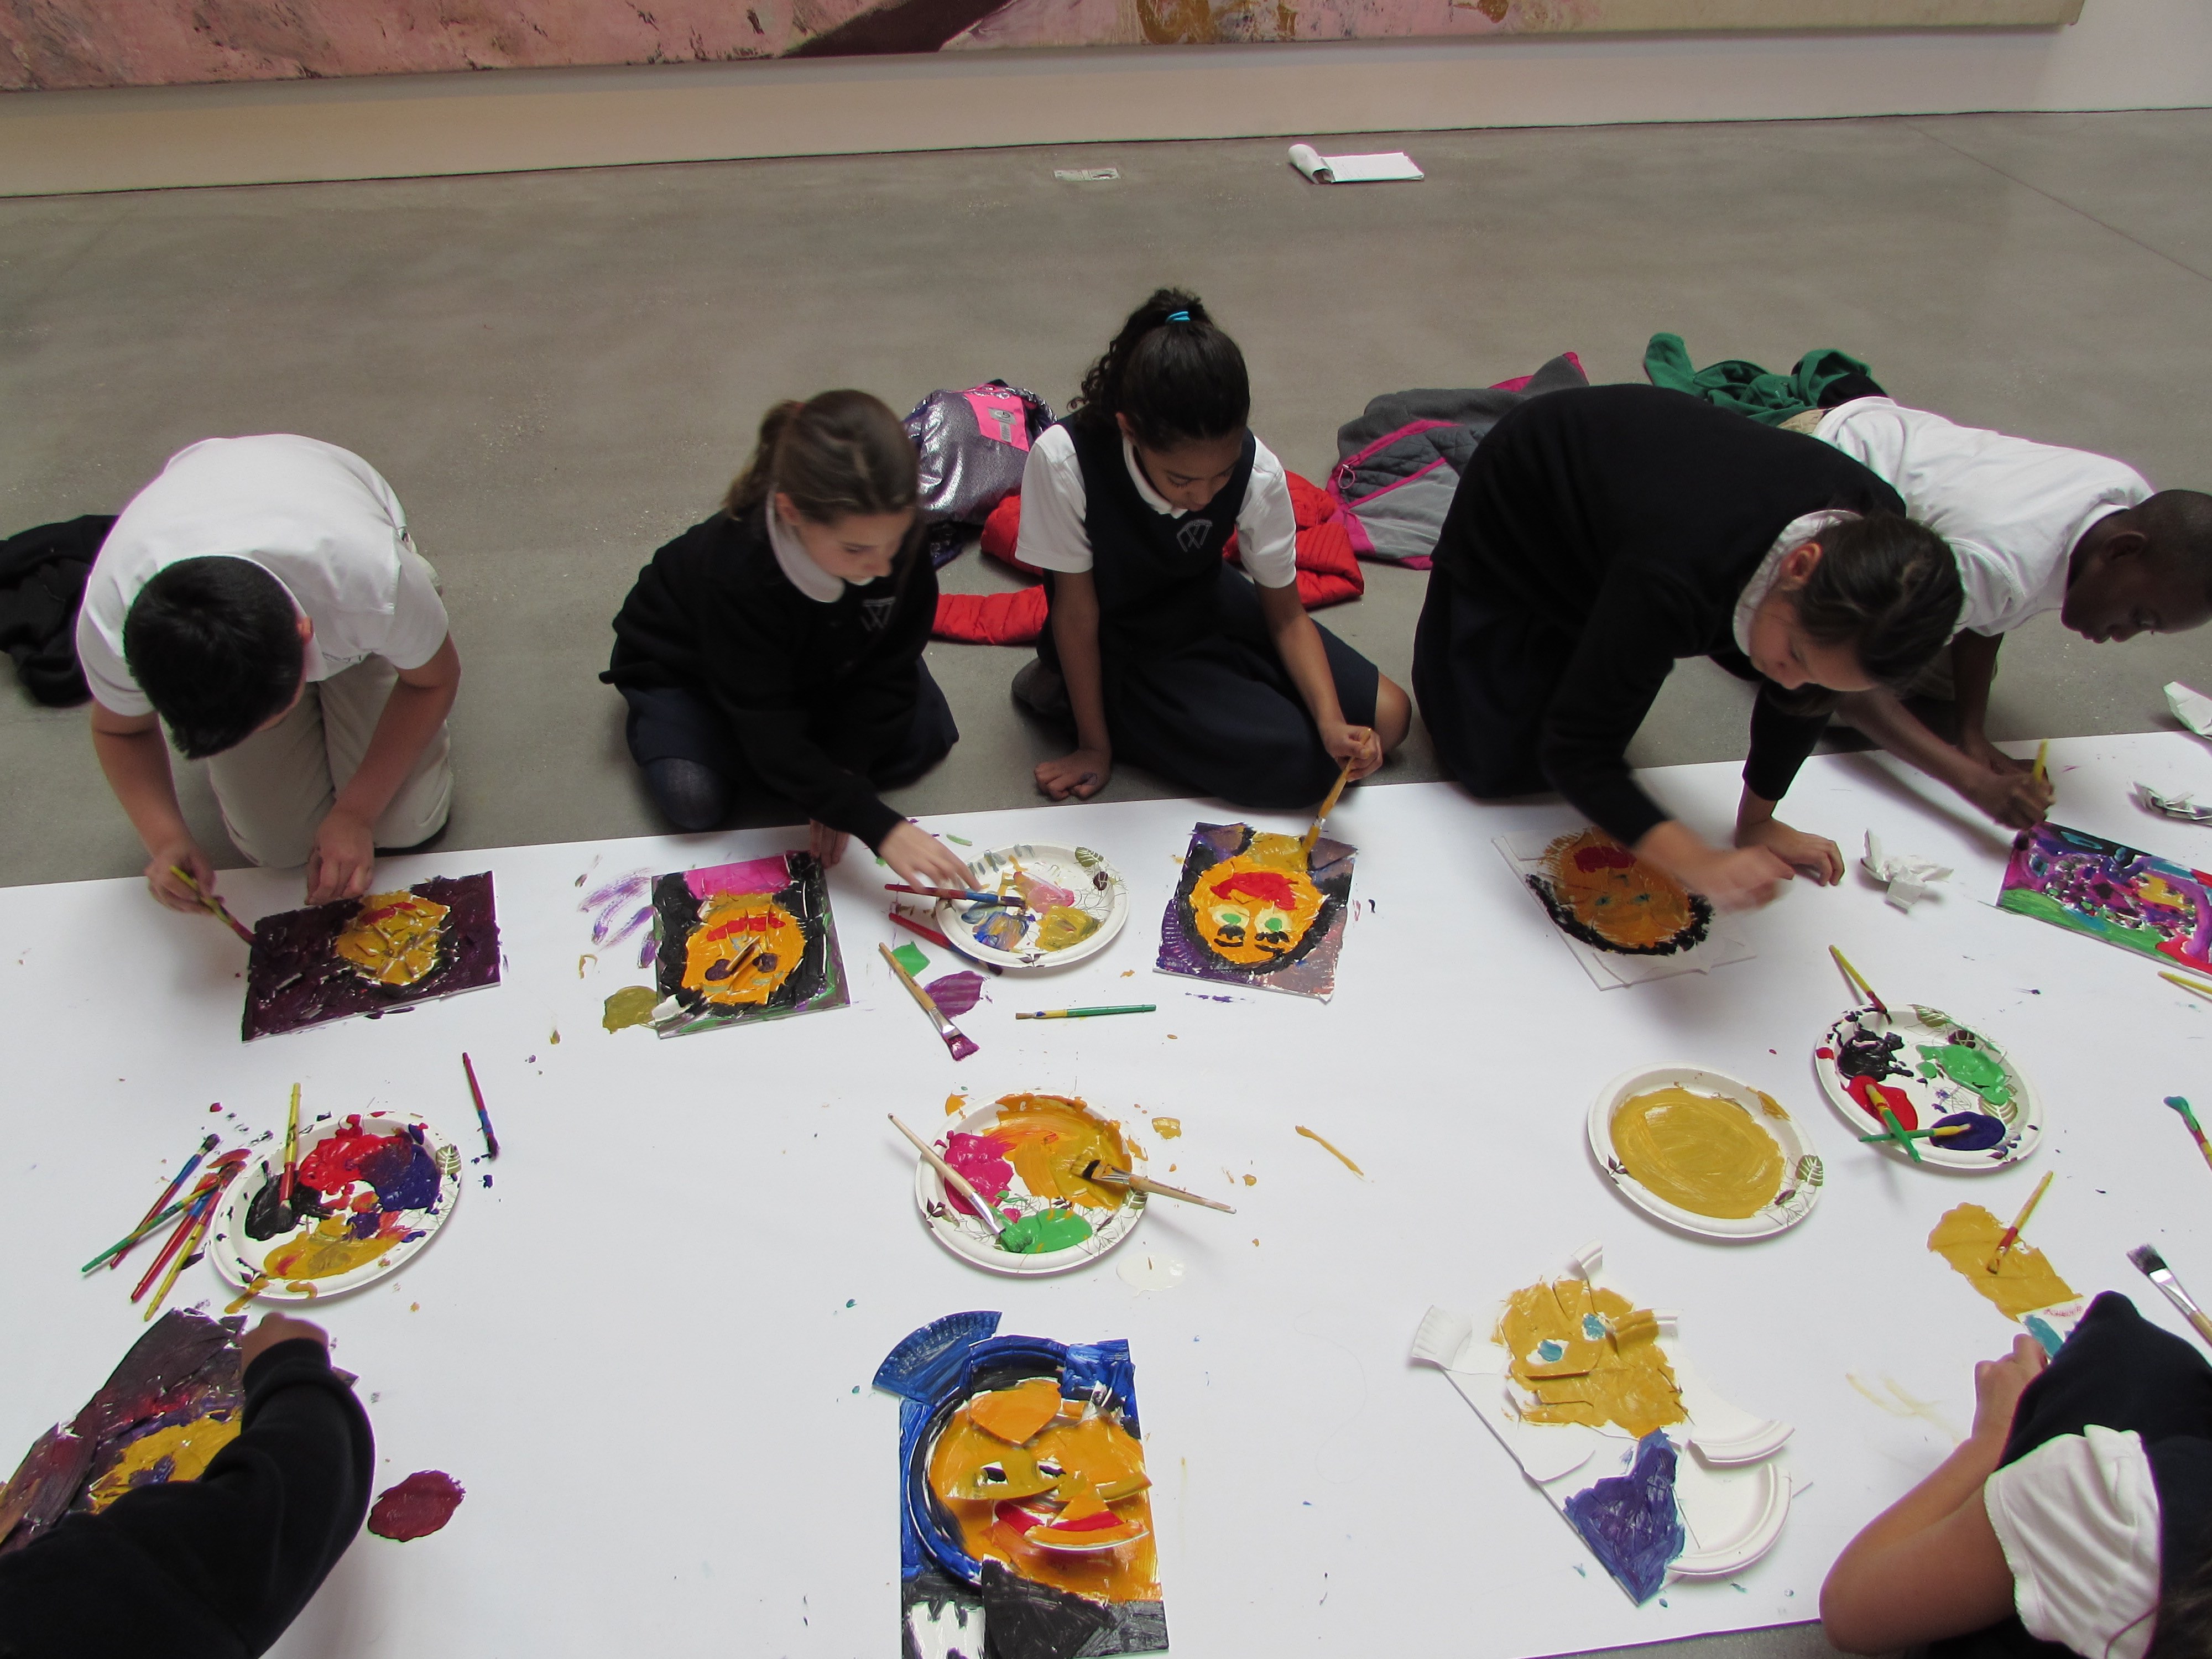 Students working on their own plate portraits, inspired by Julian Schnabel's exhibition at The Brant Foundation